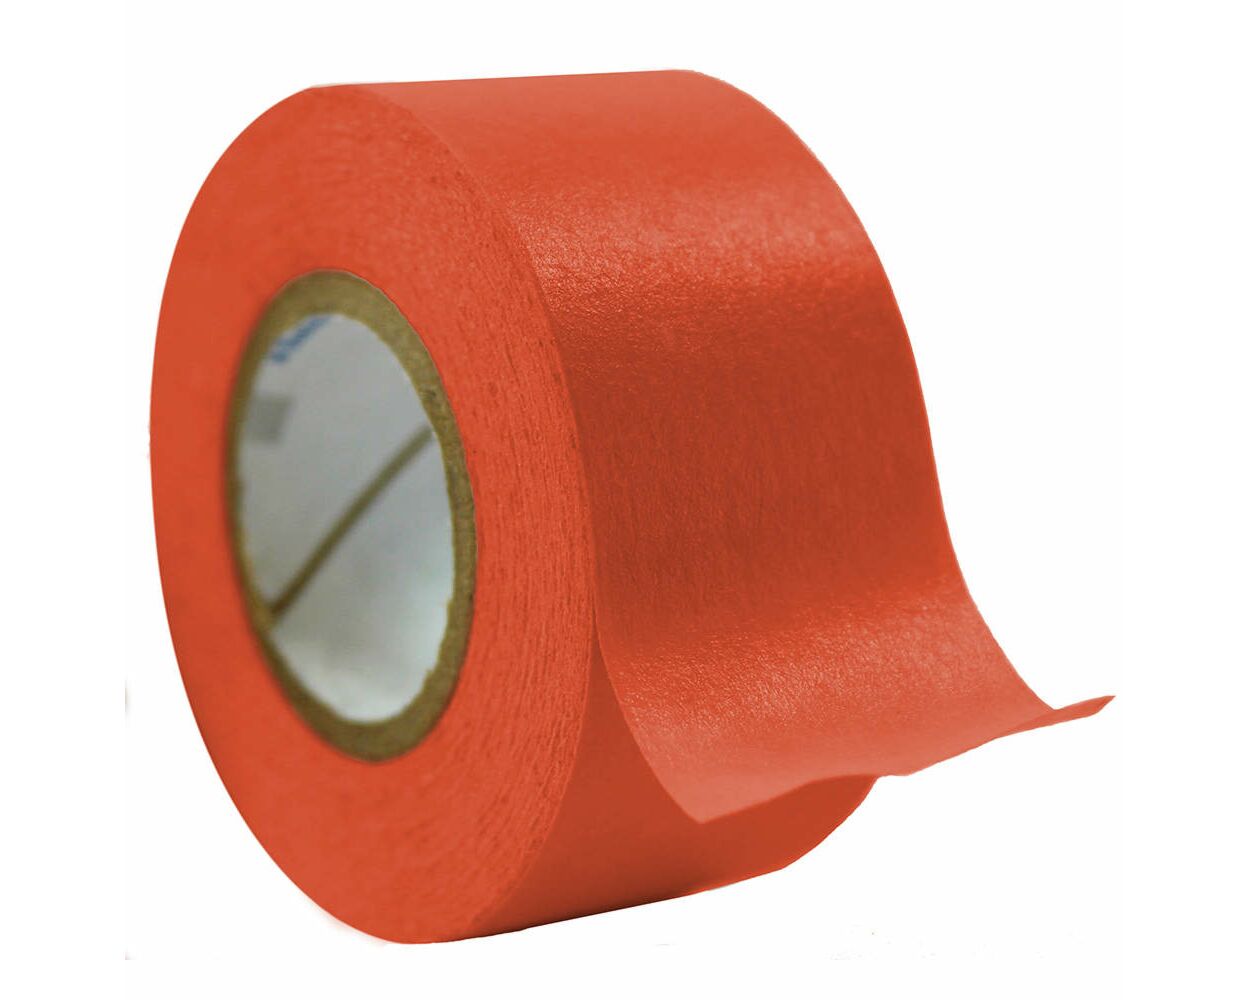 Timemed Labeling Systems, Inc. 1/2 Timetape Removable Tape, Red, 2160